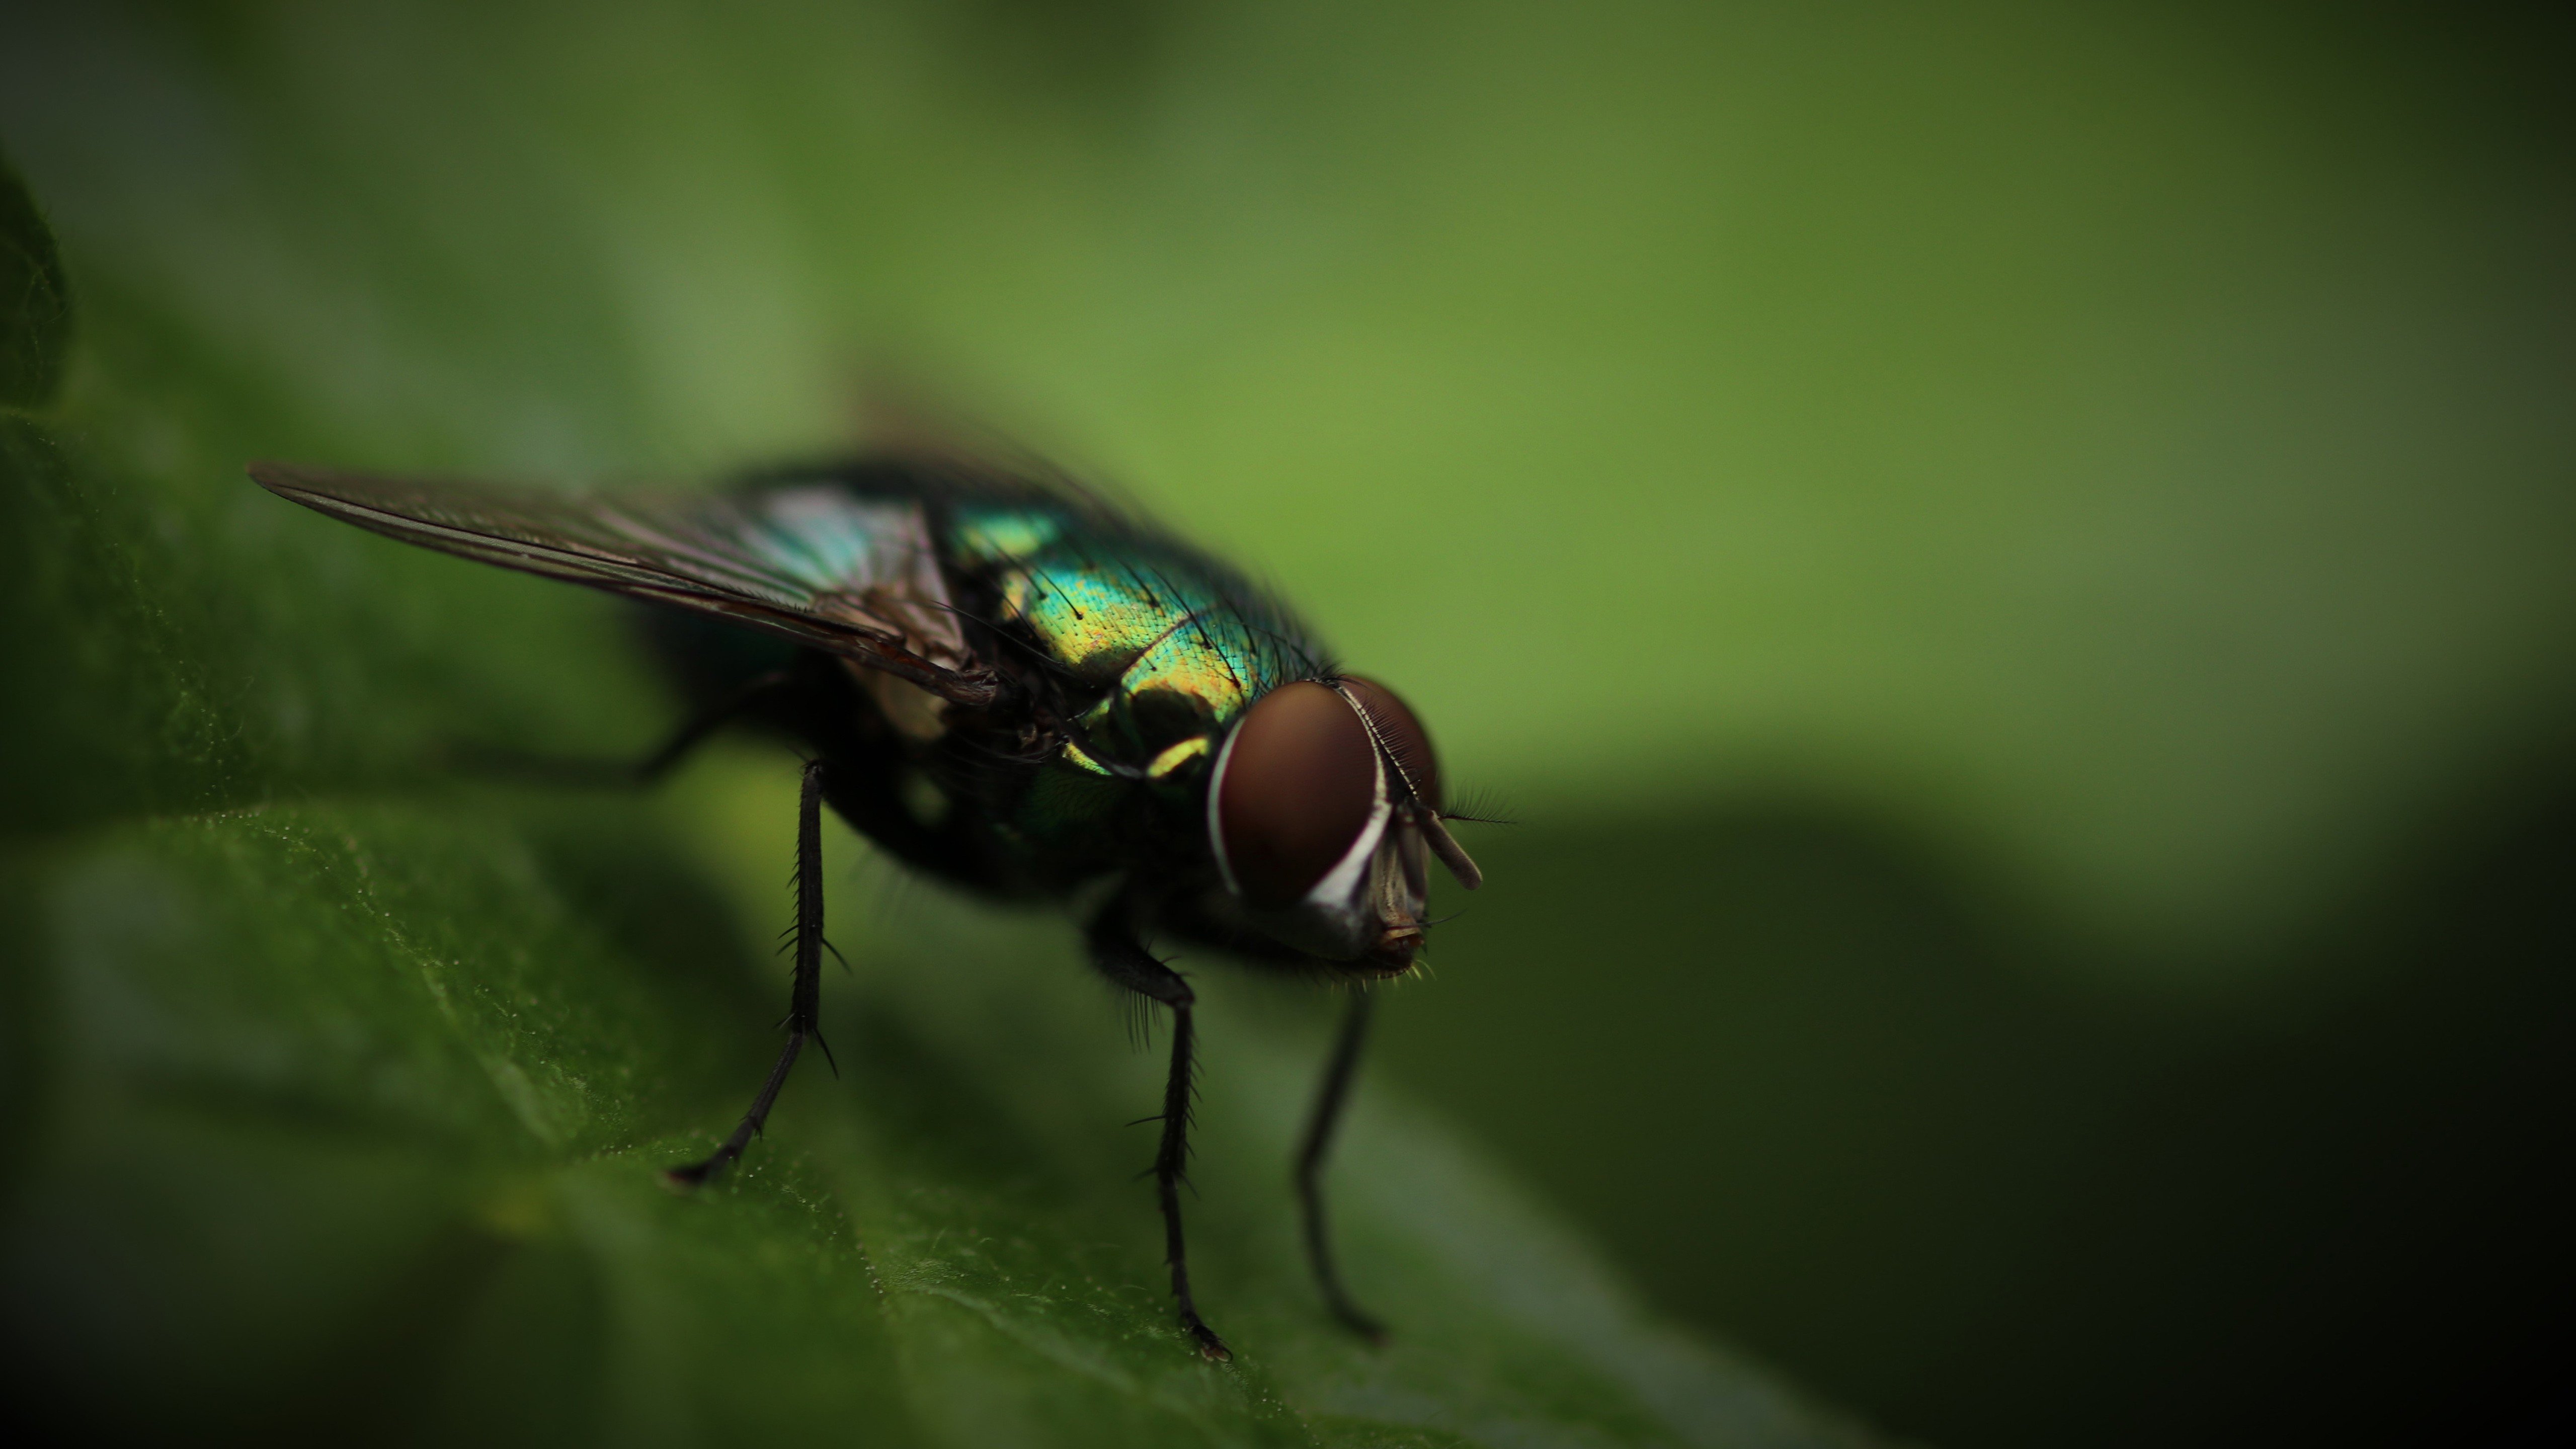 photography, Fly, Macro, Green, Bug, Insect, Blurred Wallpaper